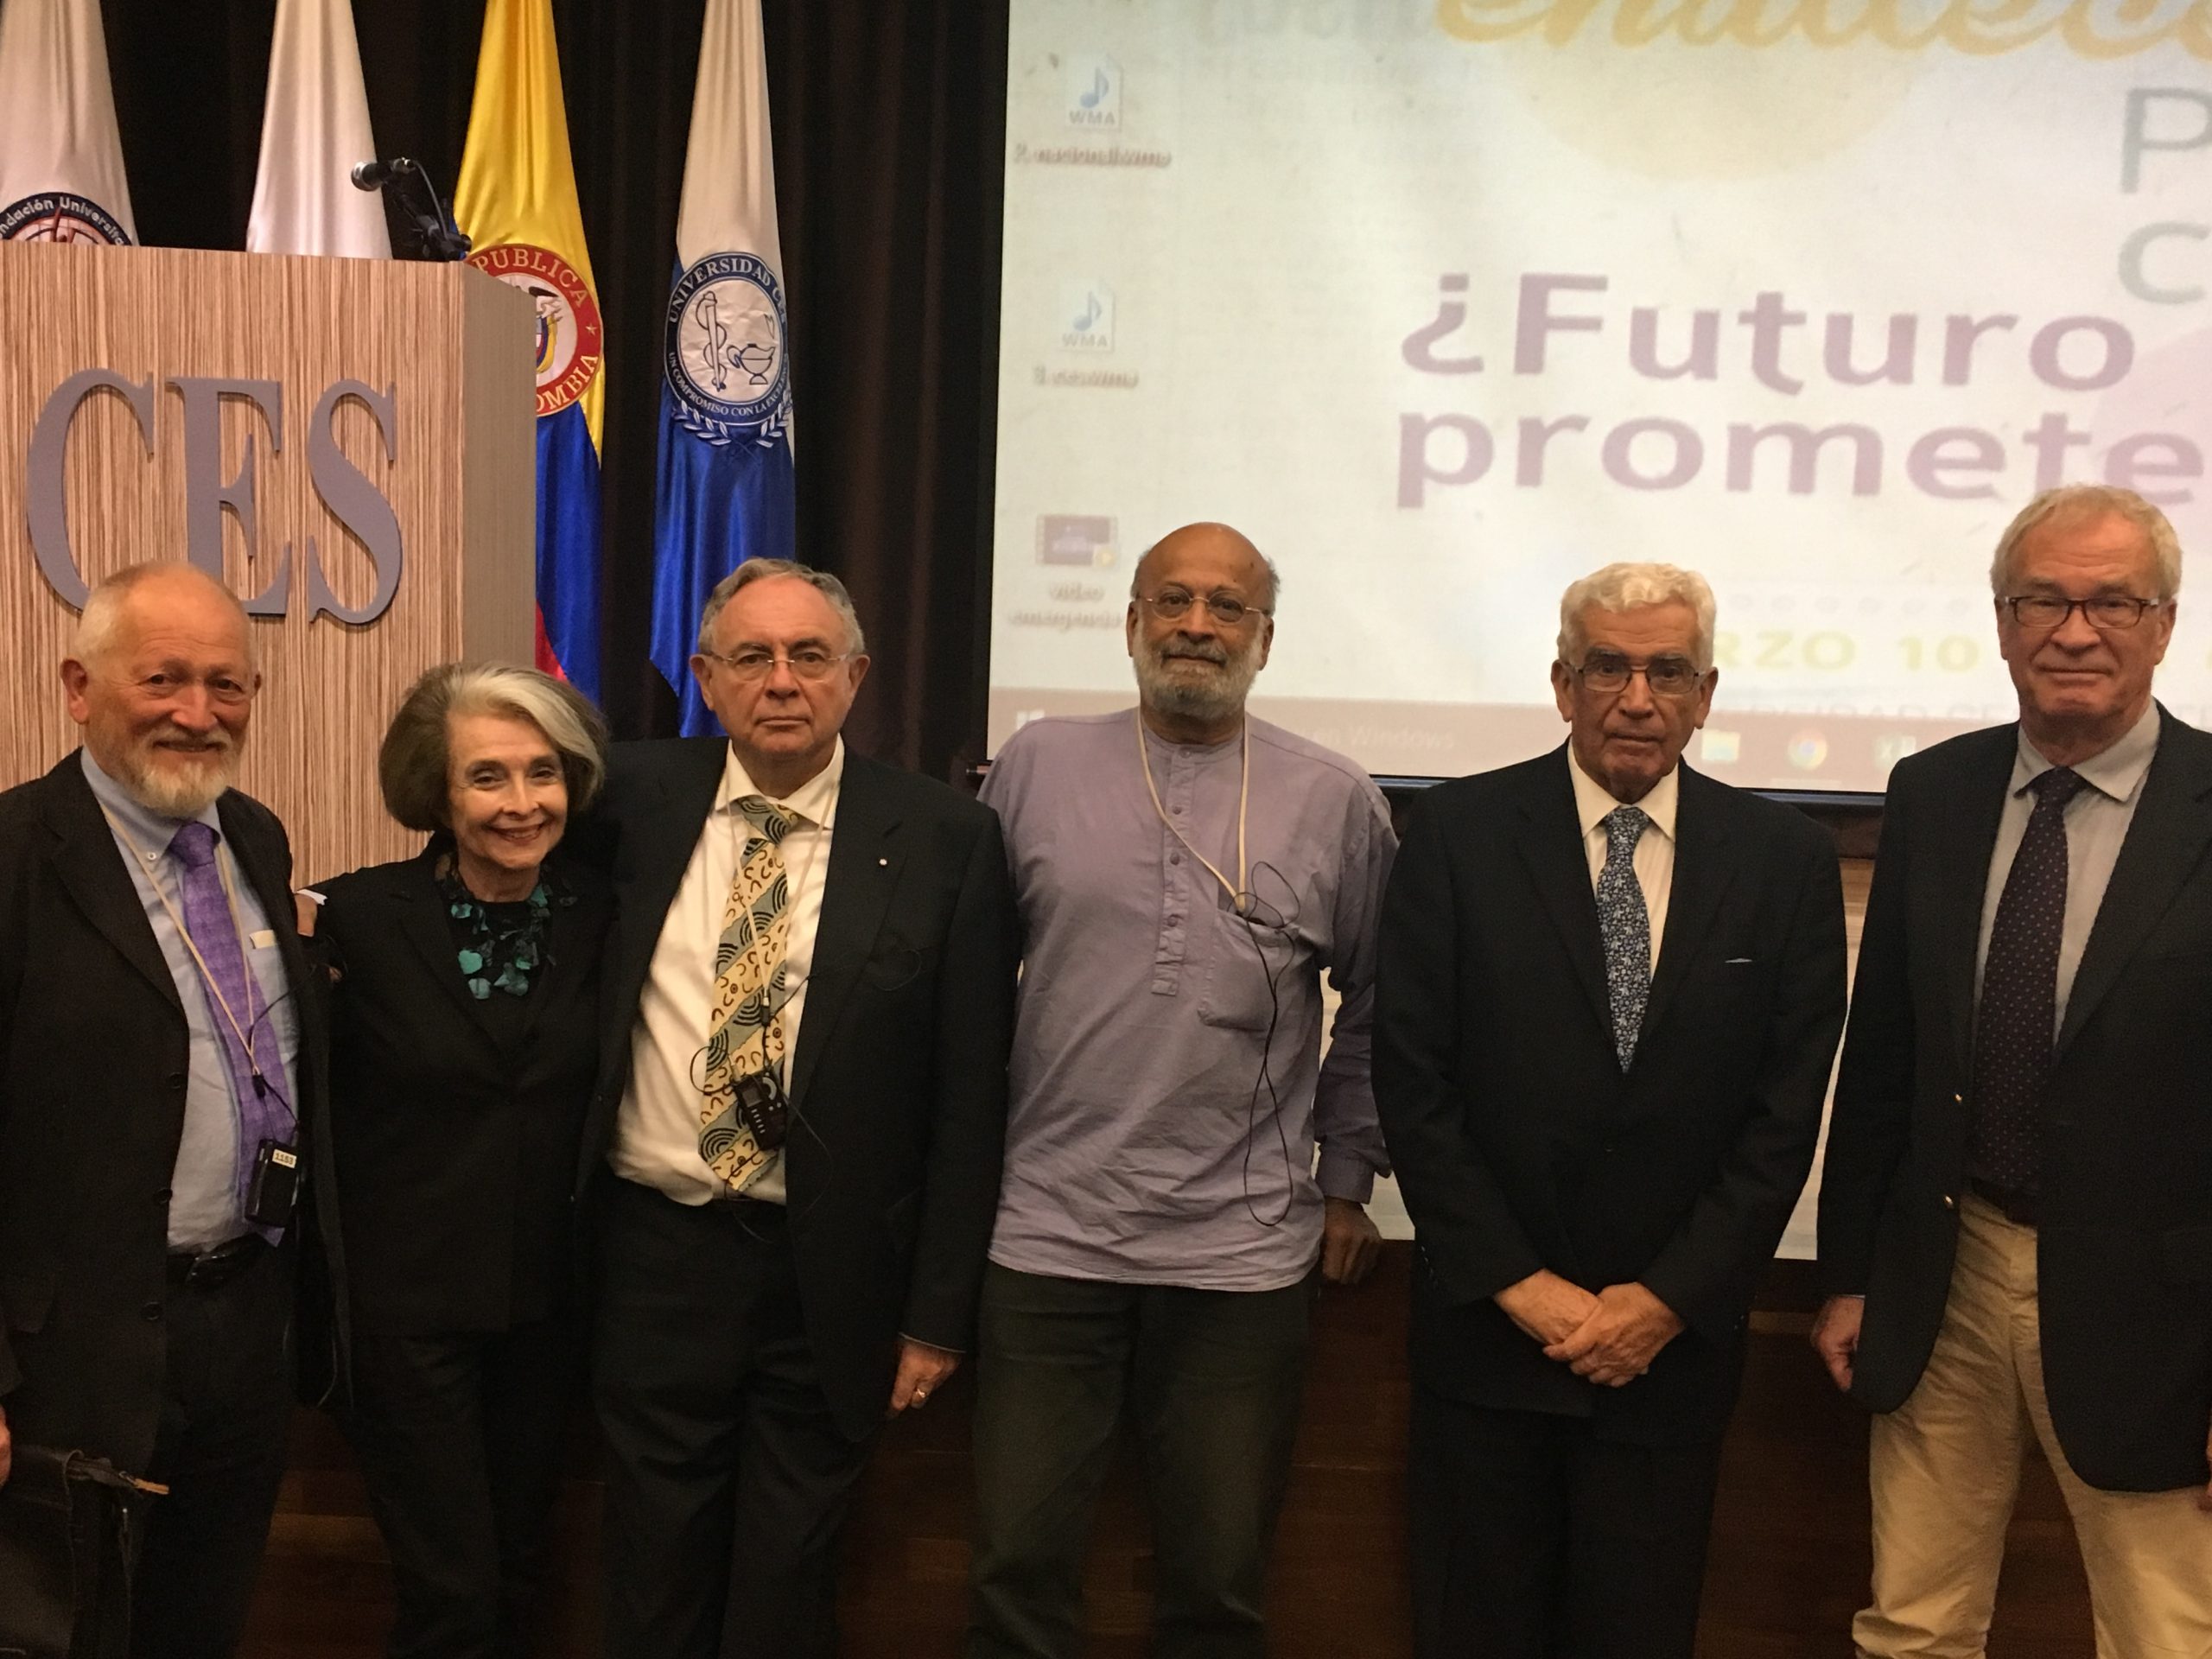 From left to right: Ole Fejerskov, Lois Cohen, Newell Johnson, Firoze Manji, Alfonso Escobar and Gunnar Dahlén at Universidad CES, Medellin, 10 March 2017